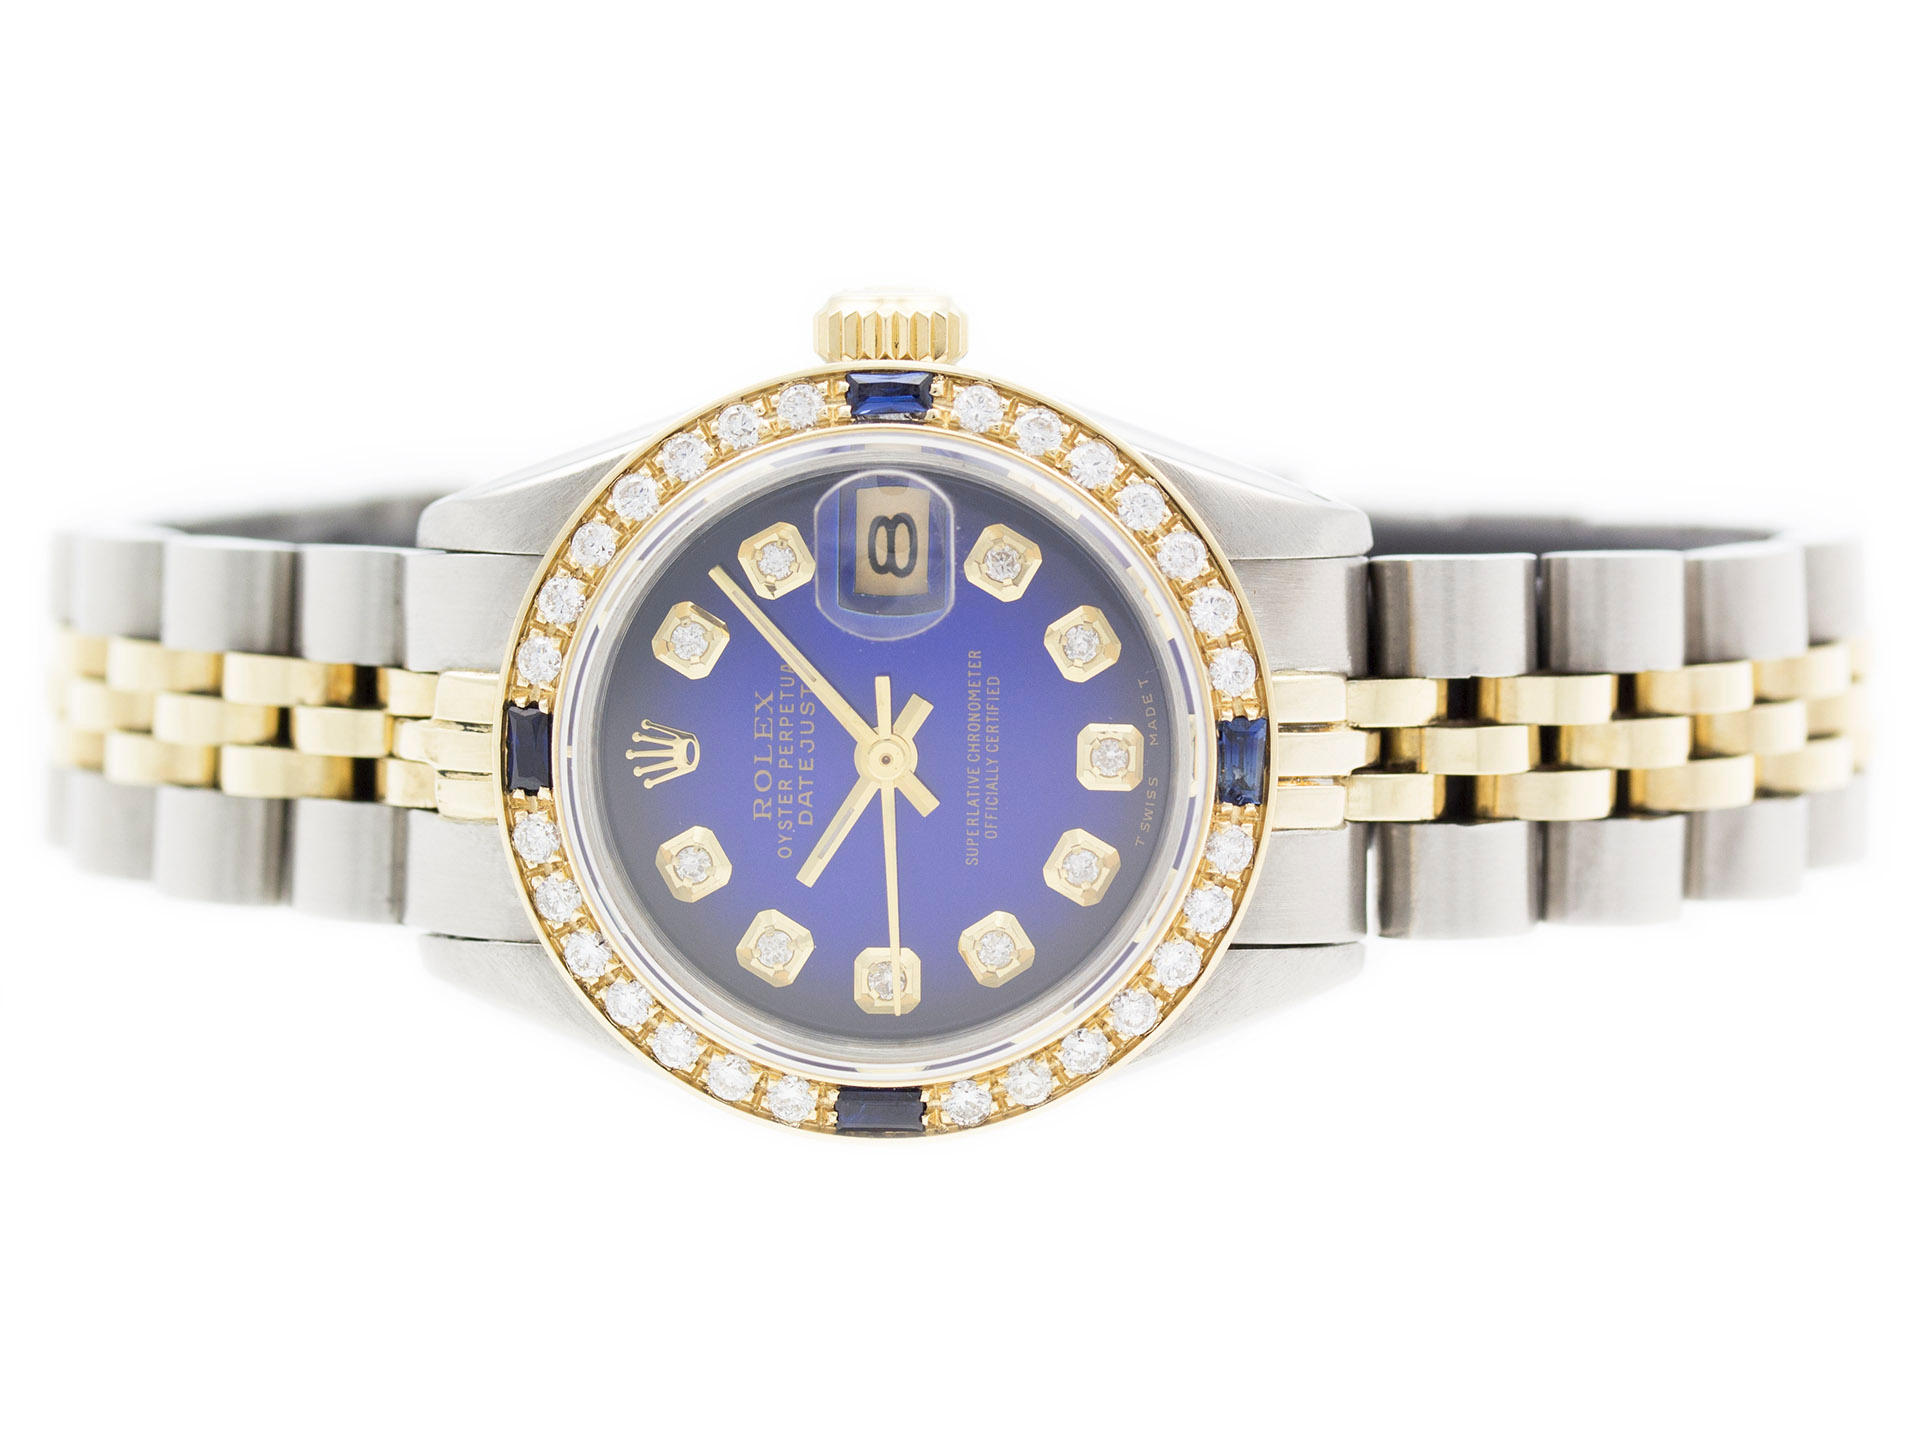 Precision Watches & Jewelry - Official Rolex Jeweler Photo